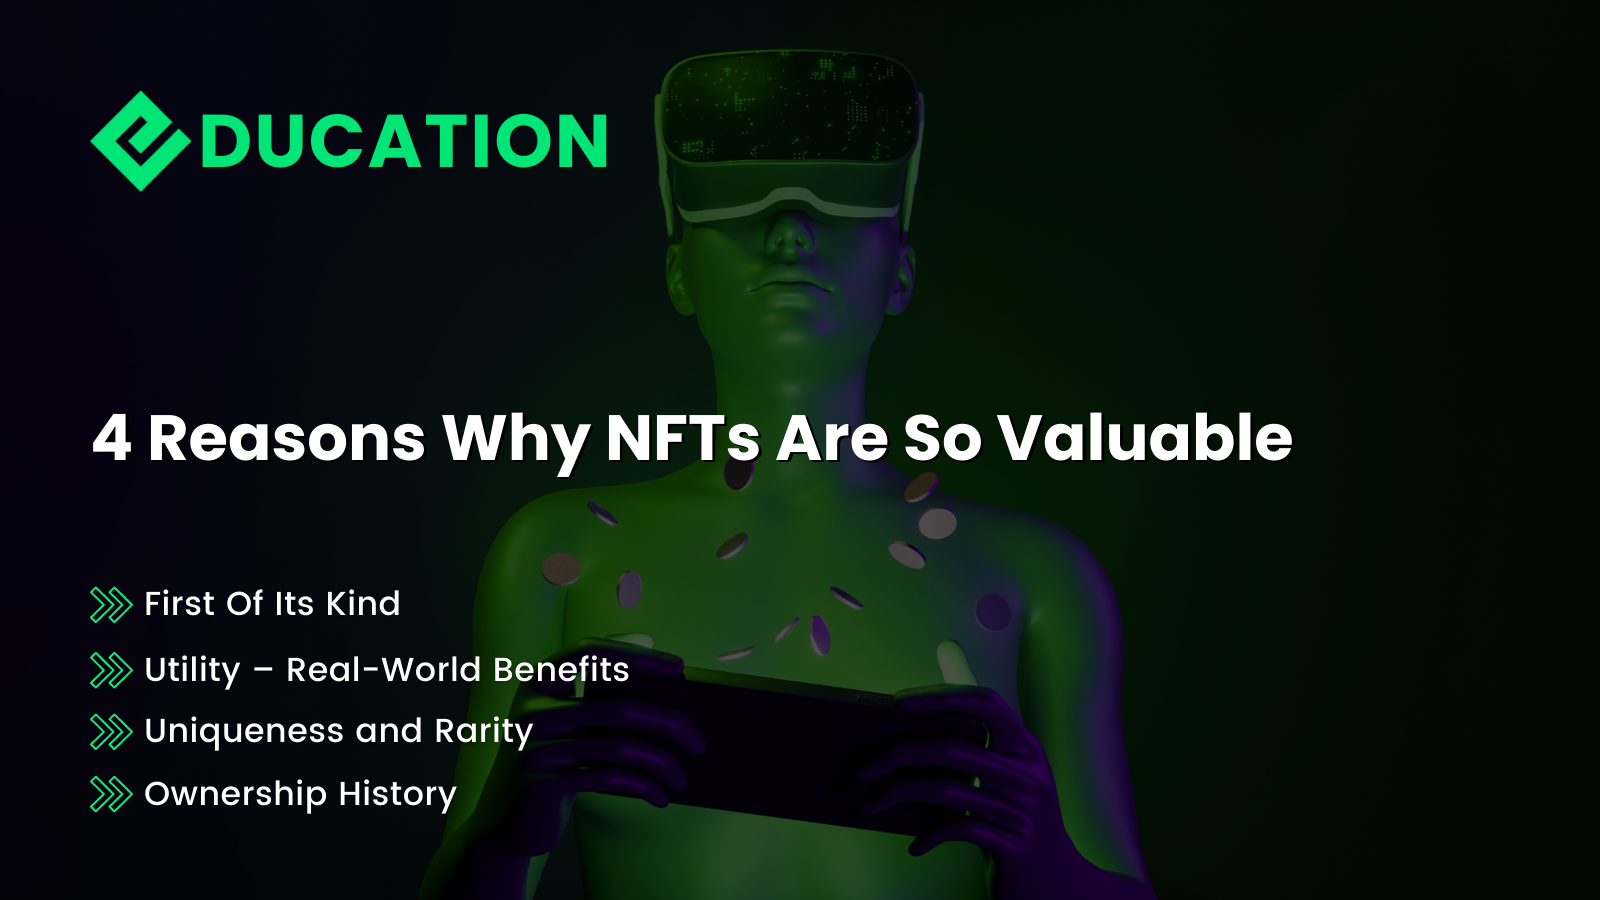 4 Reasons Why NFTs Are So Valuable